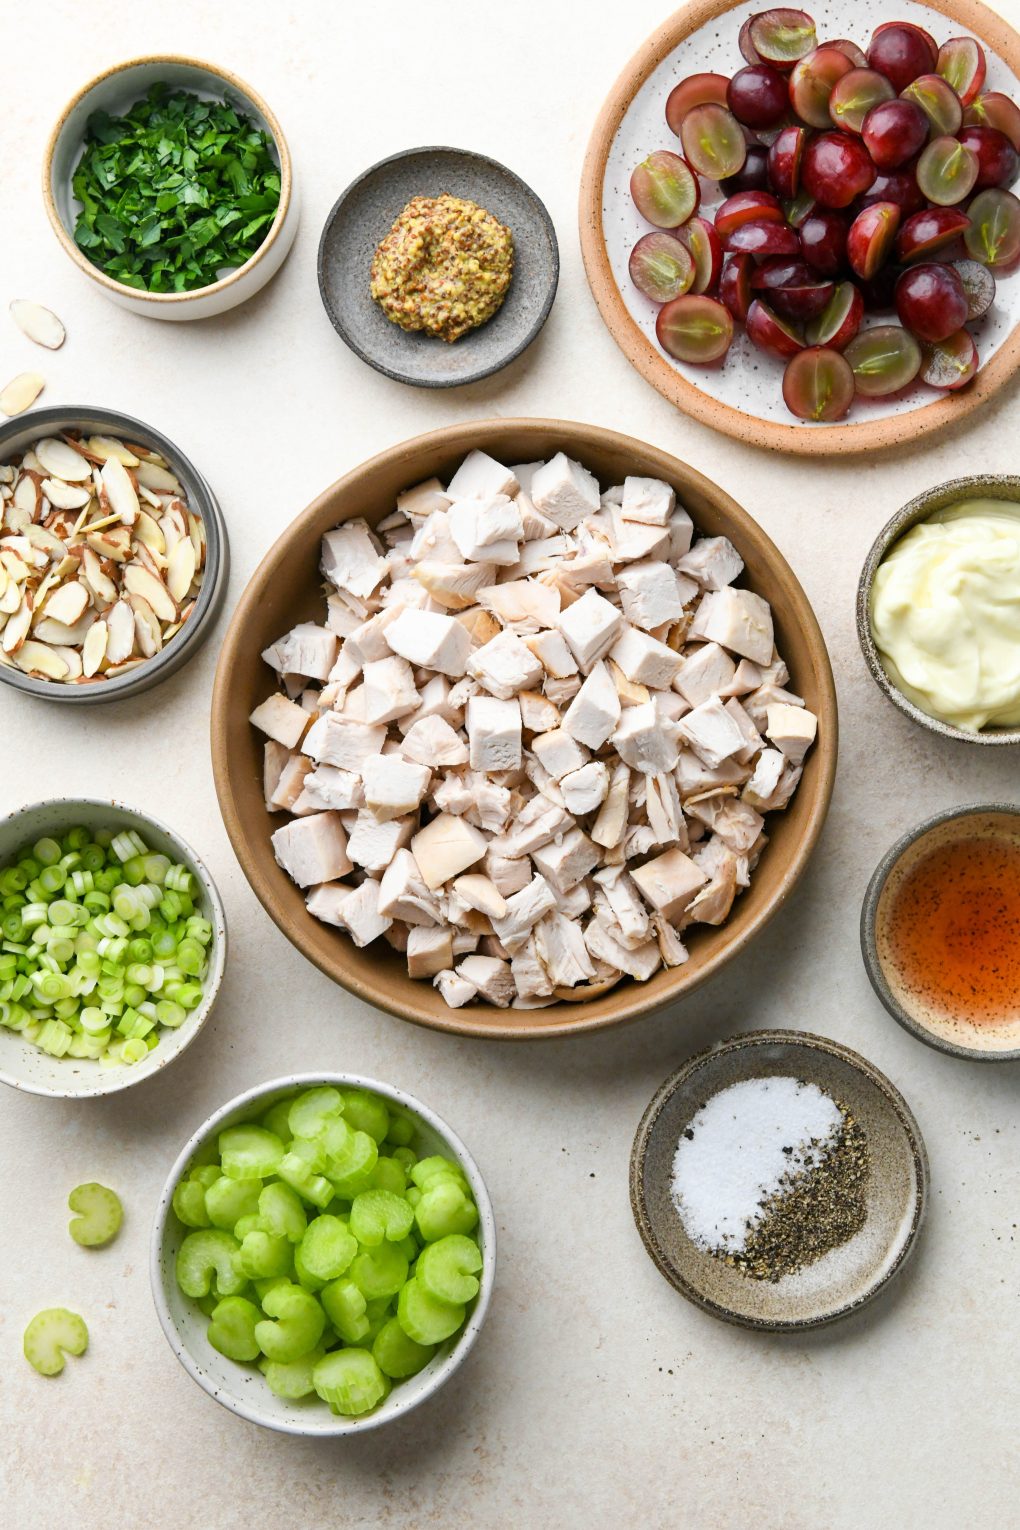 Ingredients for easy chicken salad with grapes in various ceramic plates and bowls on a light cream colored background. 